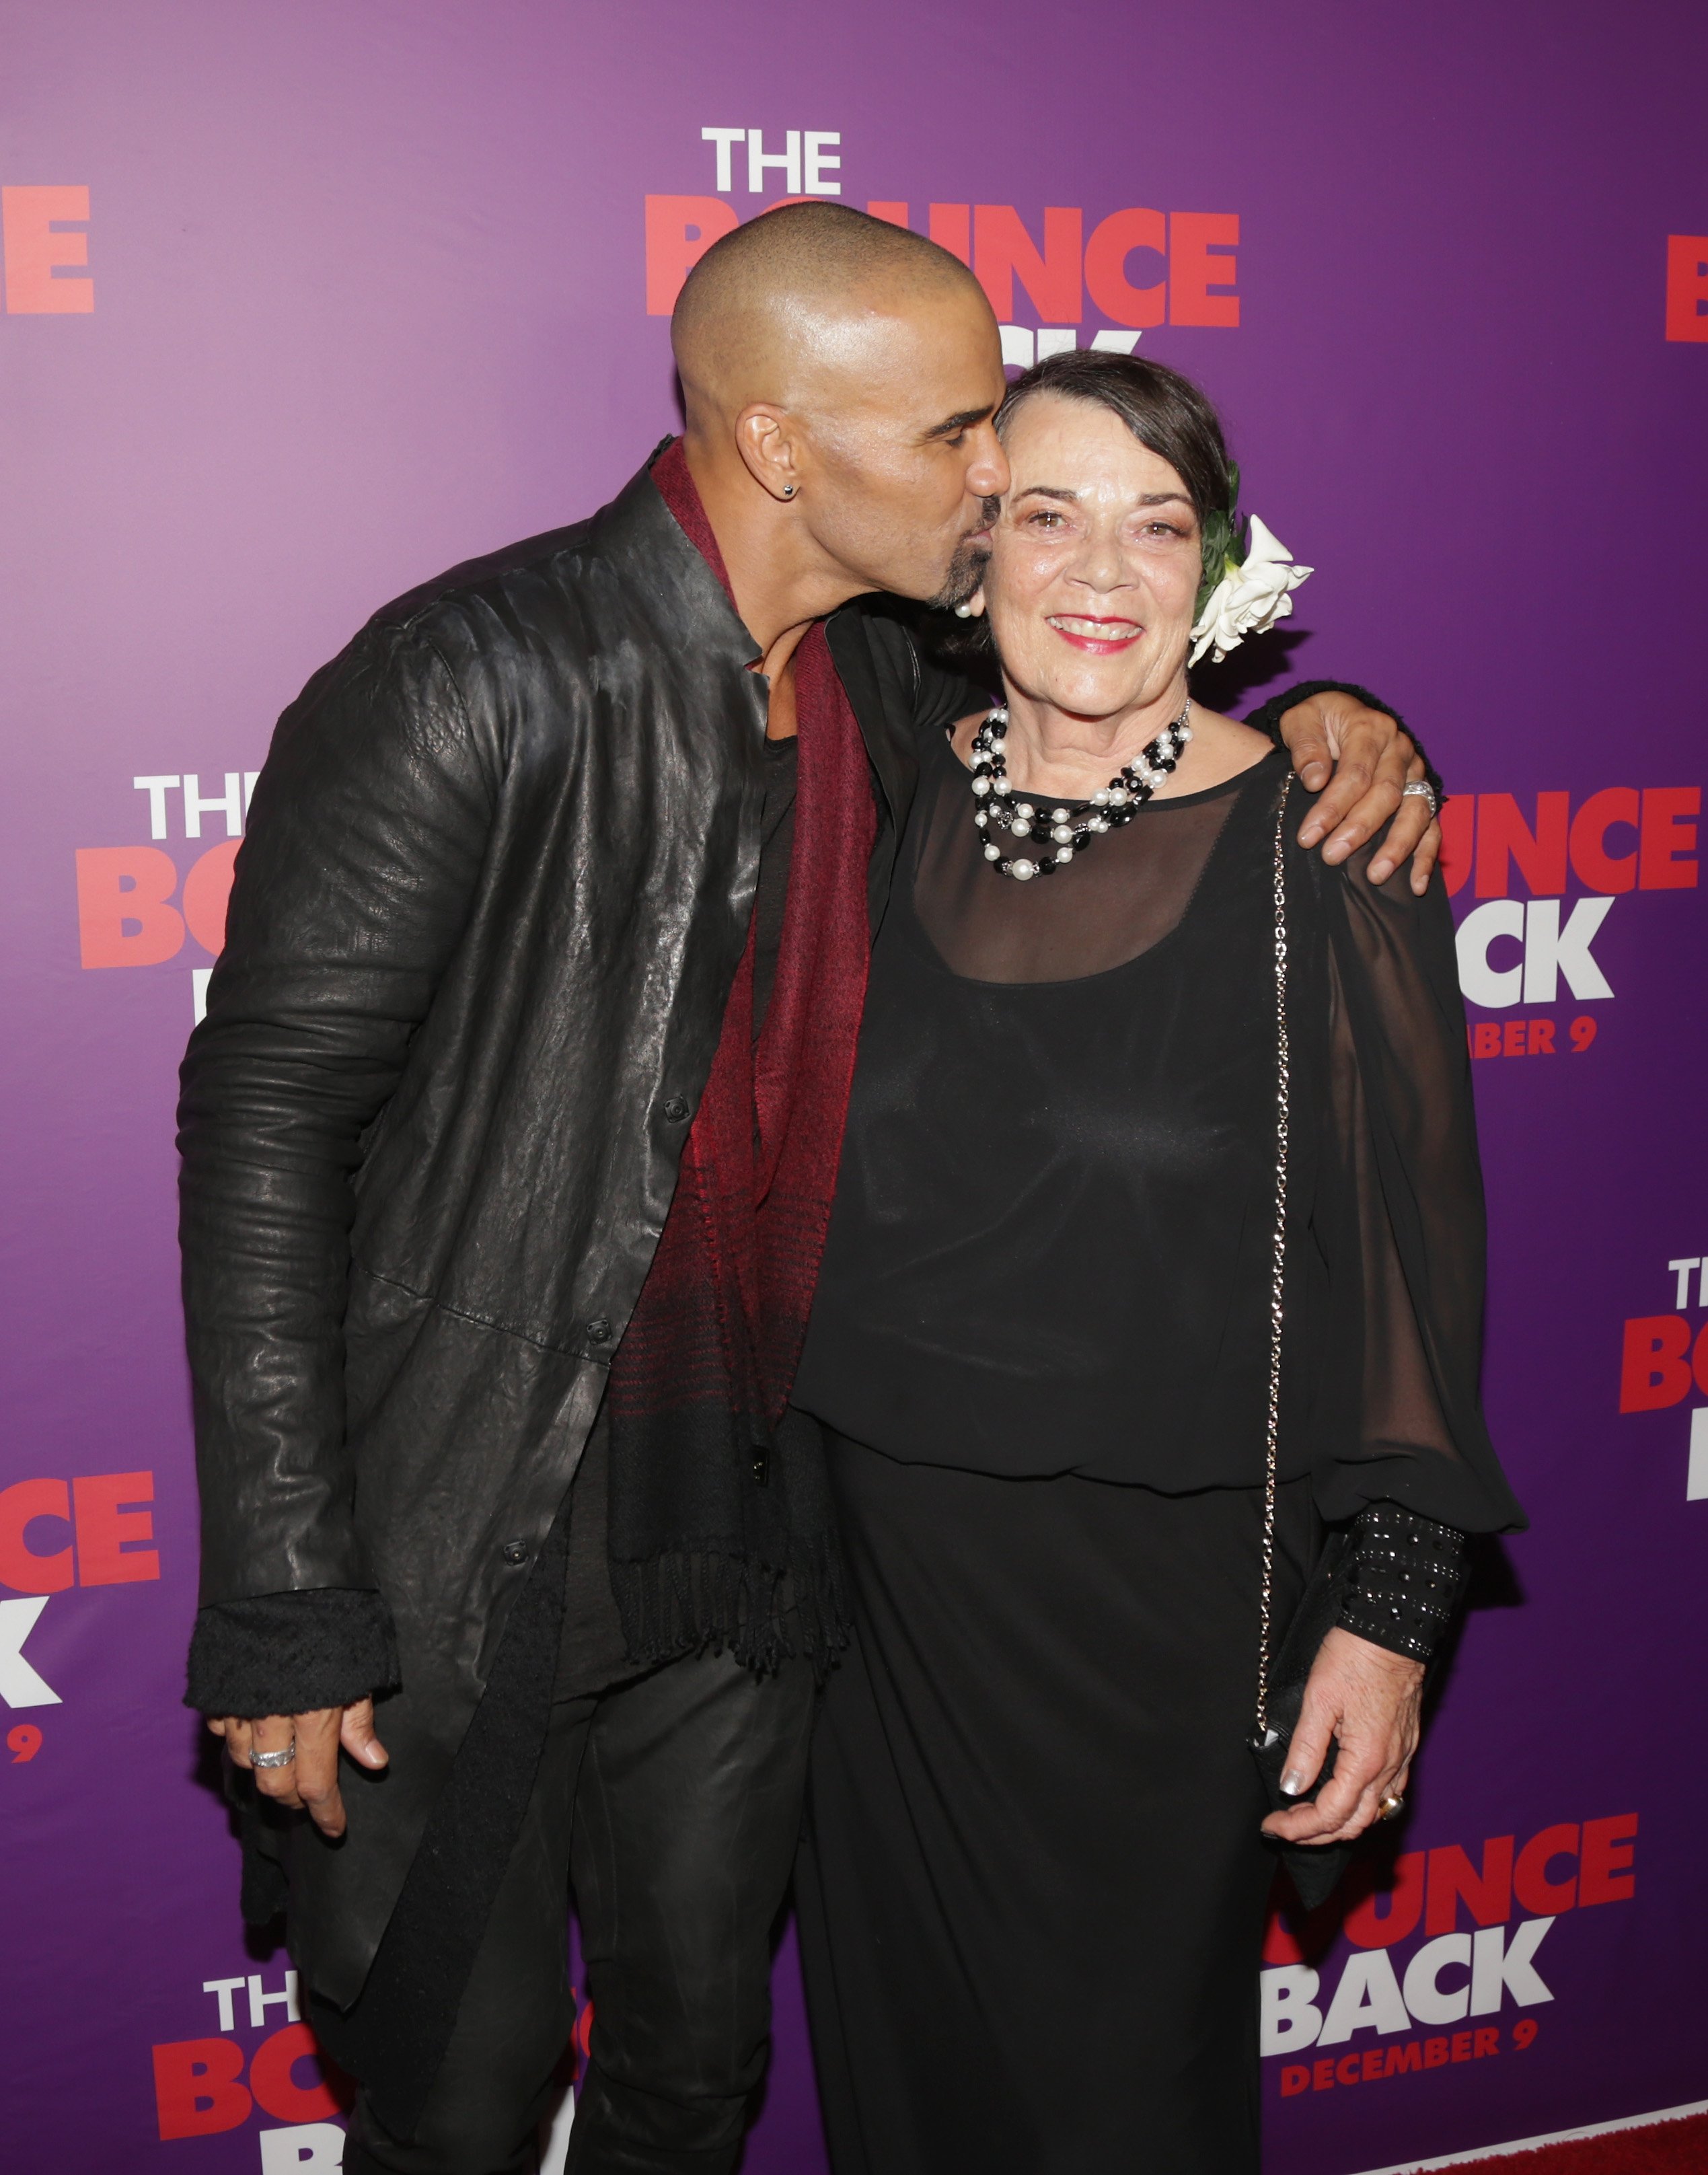 Shemar Moore and his mother Marilyn Wilson at the premiere of his move "The Bounce Back" in 2016 | Photo: Getty Images